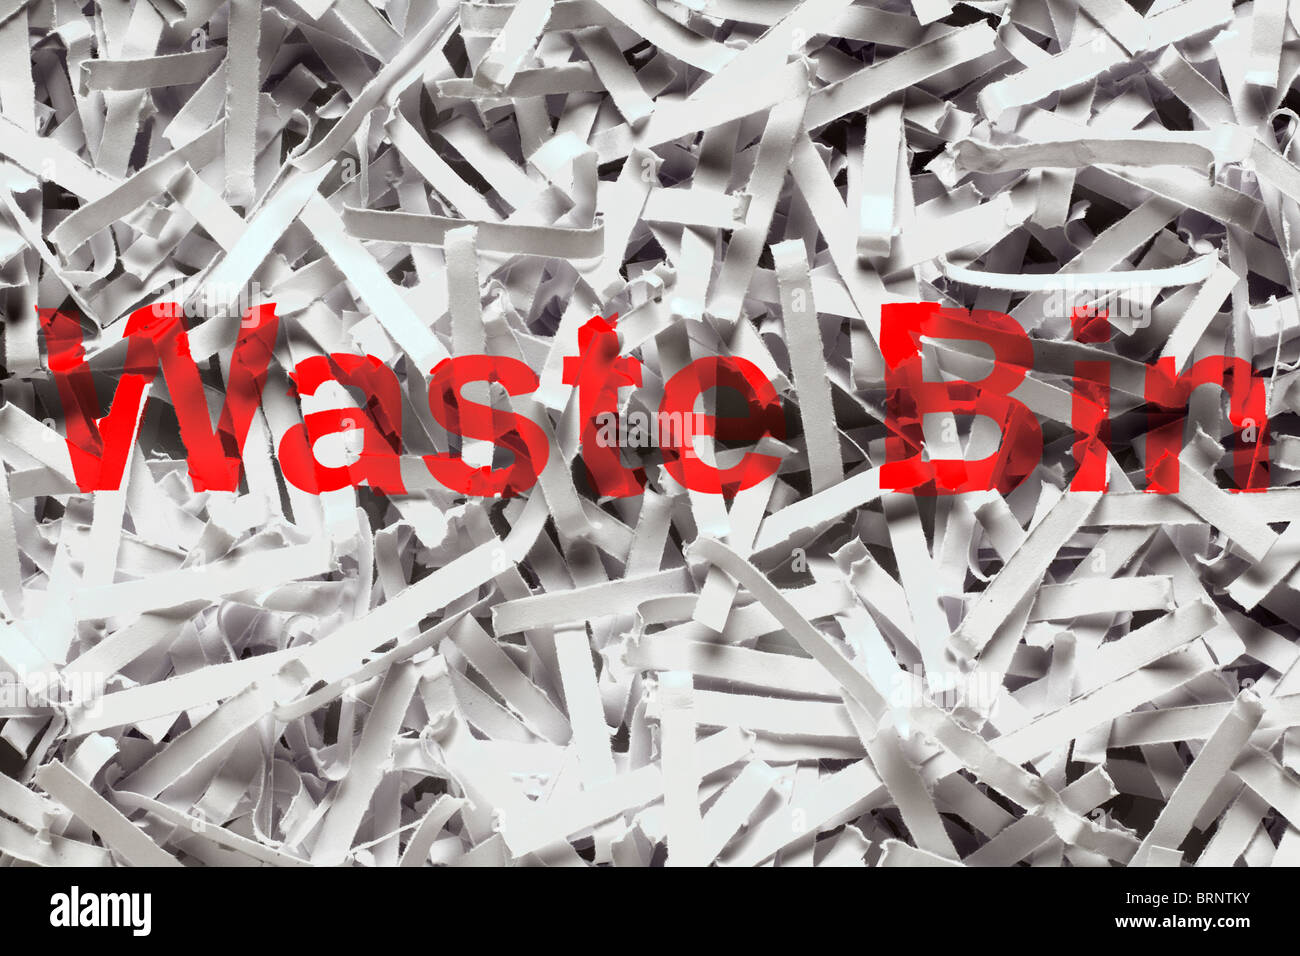 close up detail image of sheredded paper with the words waste bin printed on it Stock Photo